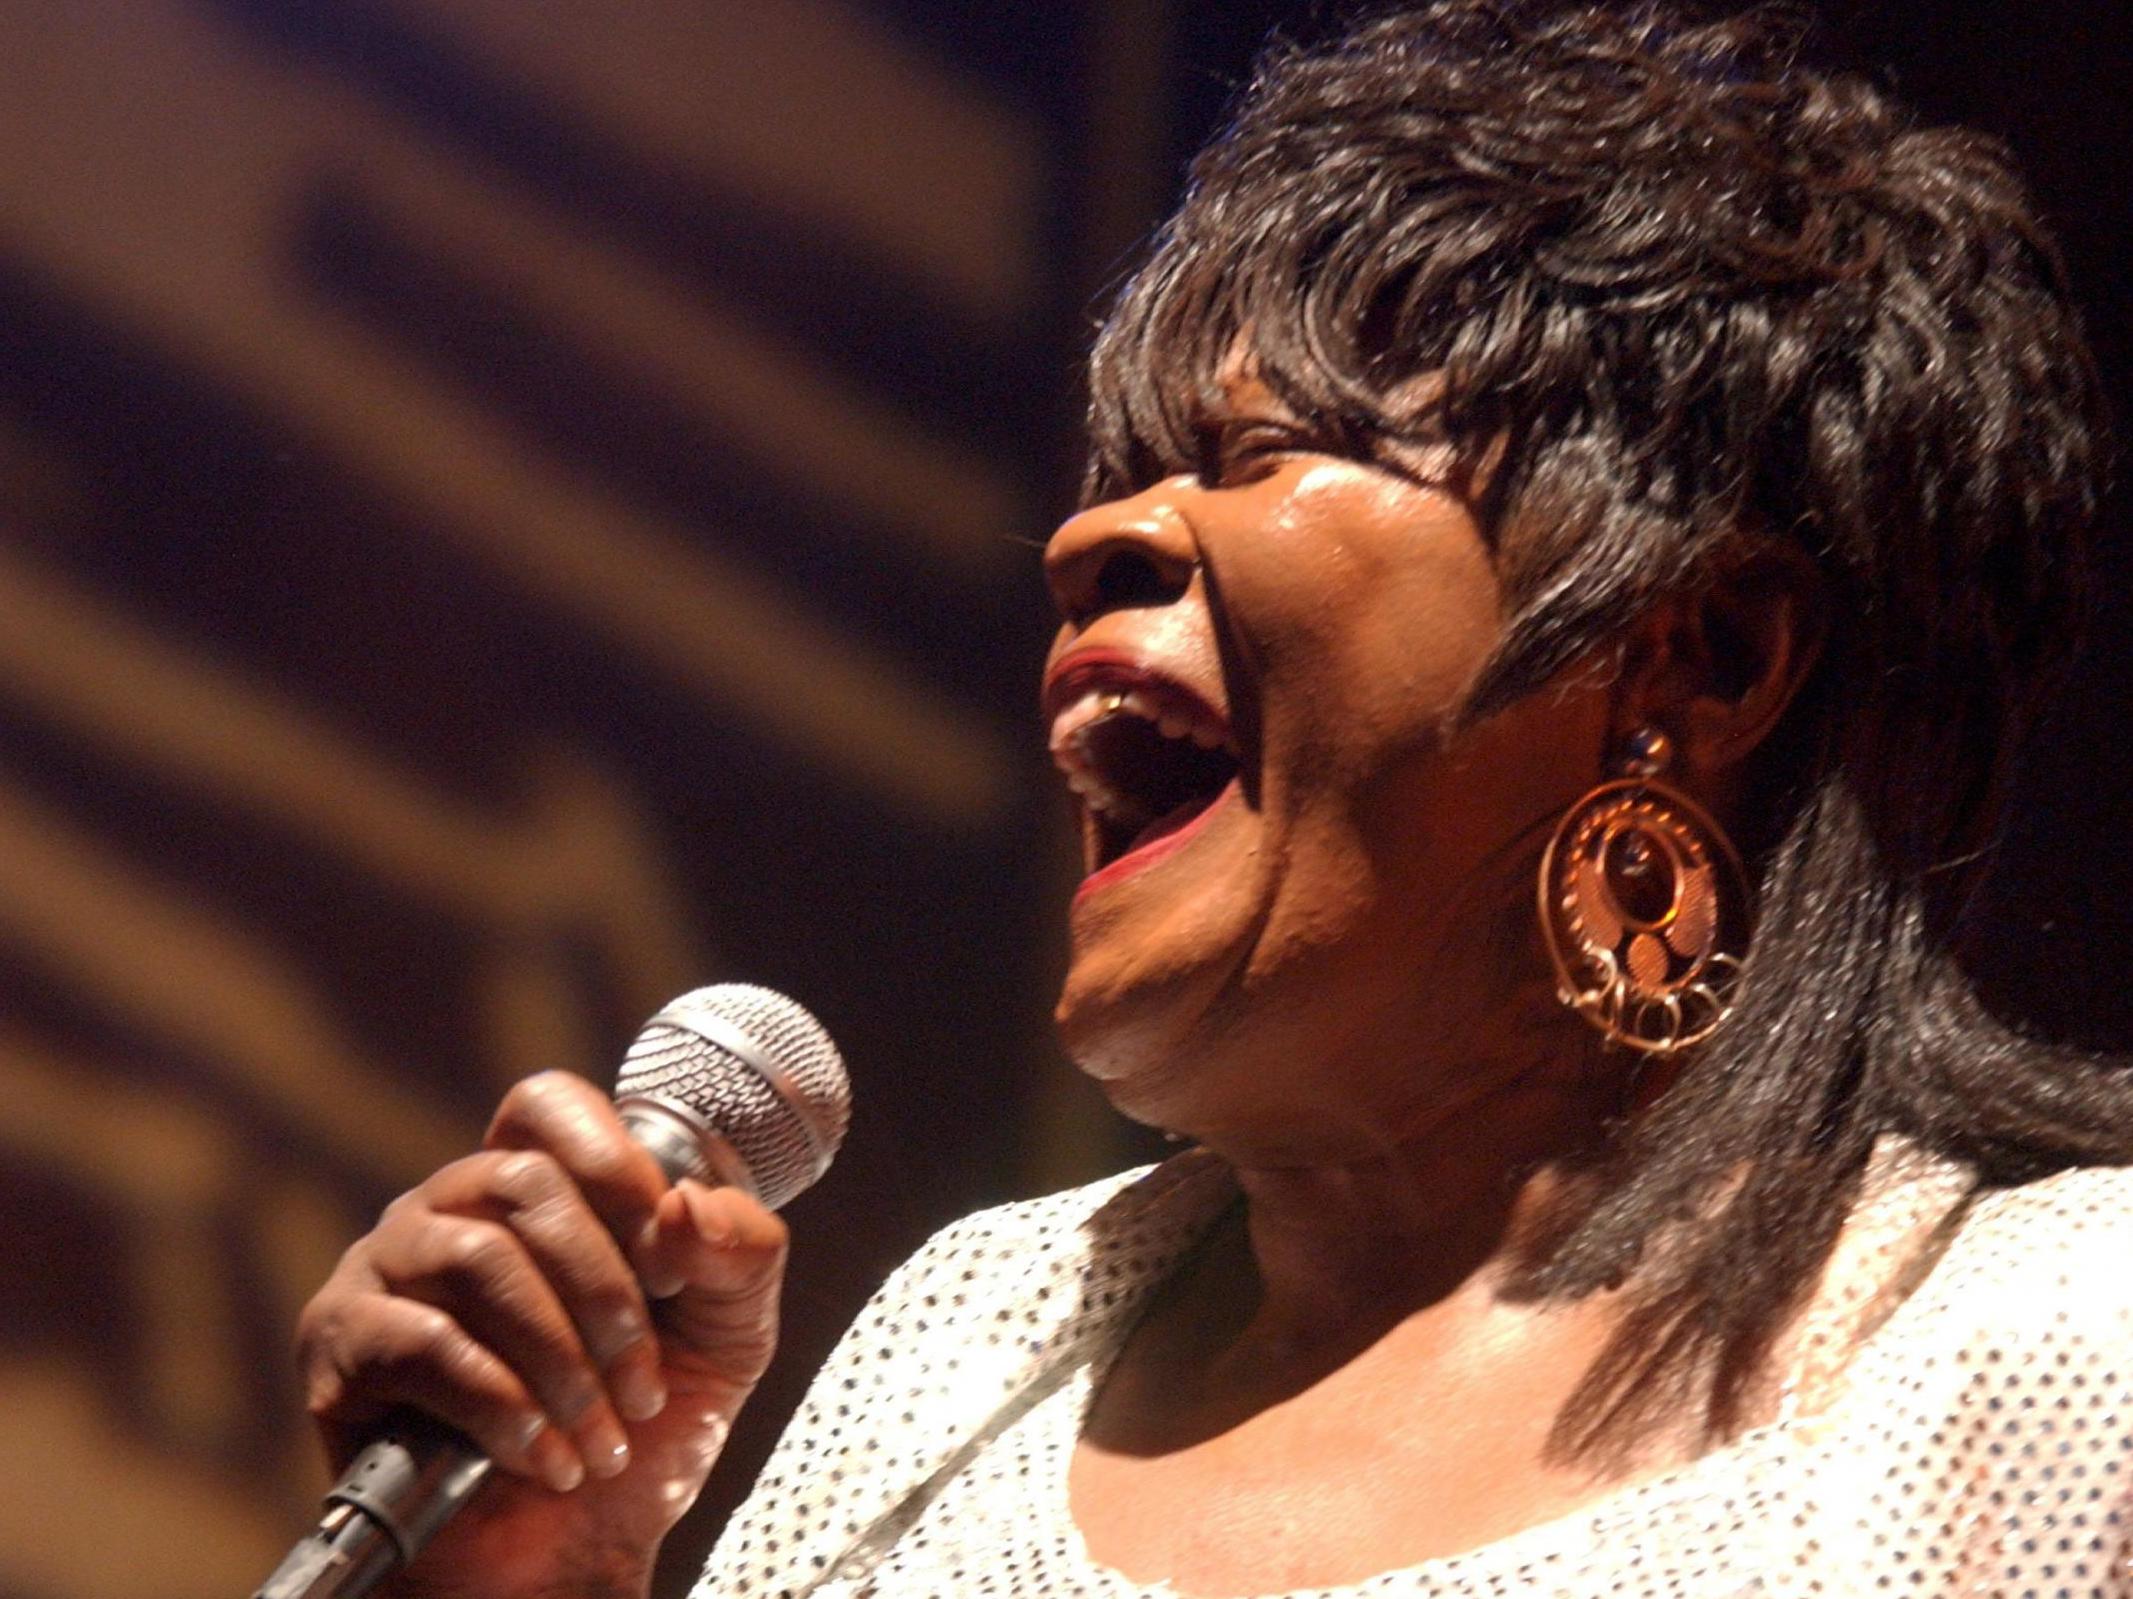 A Life in Focus: Koko Taylor, Chicago blues scene queen who became a trailblazer for women